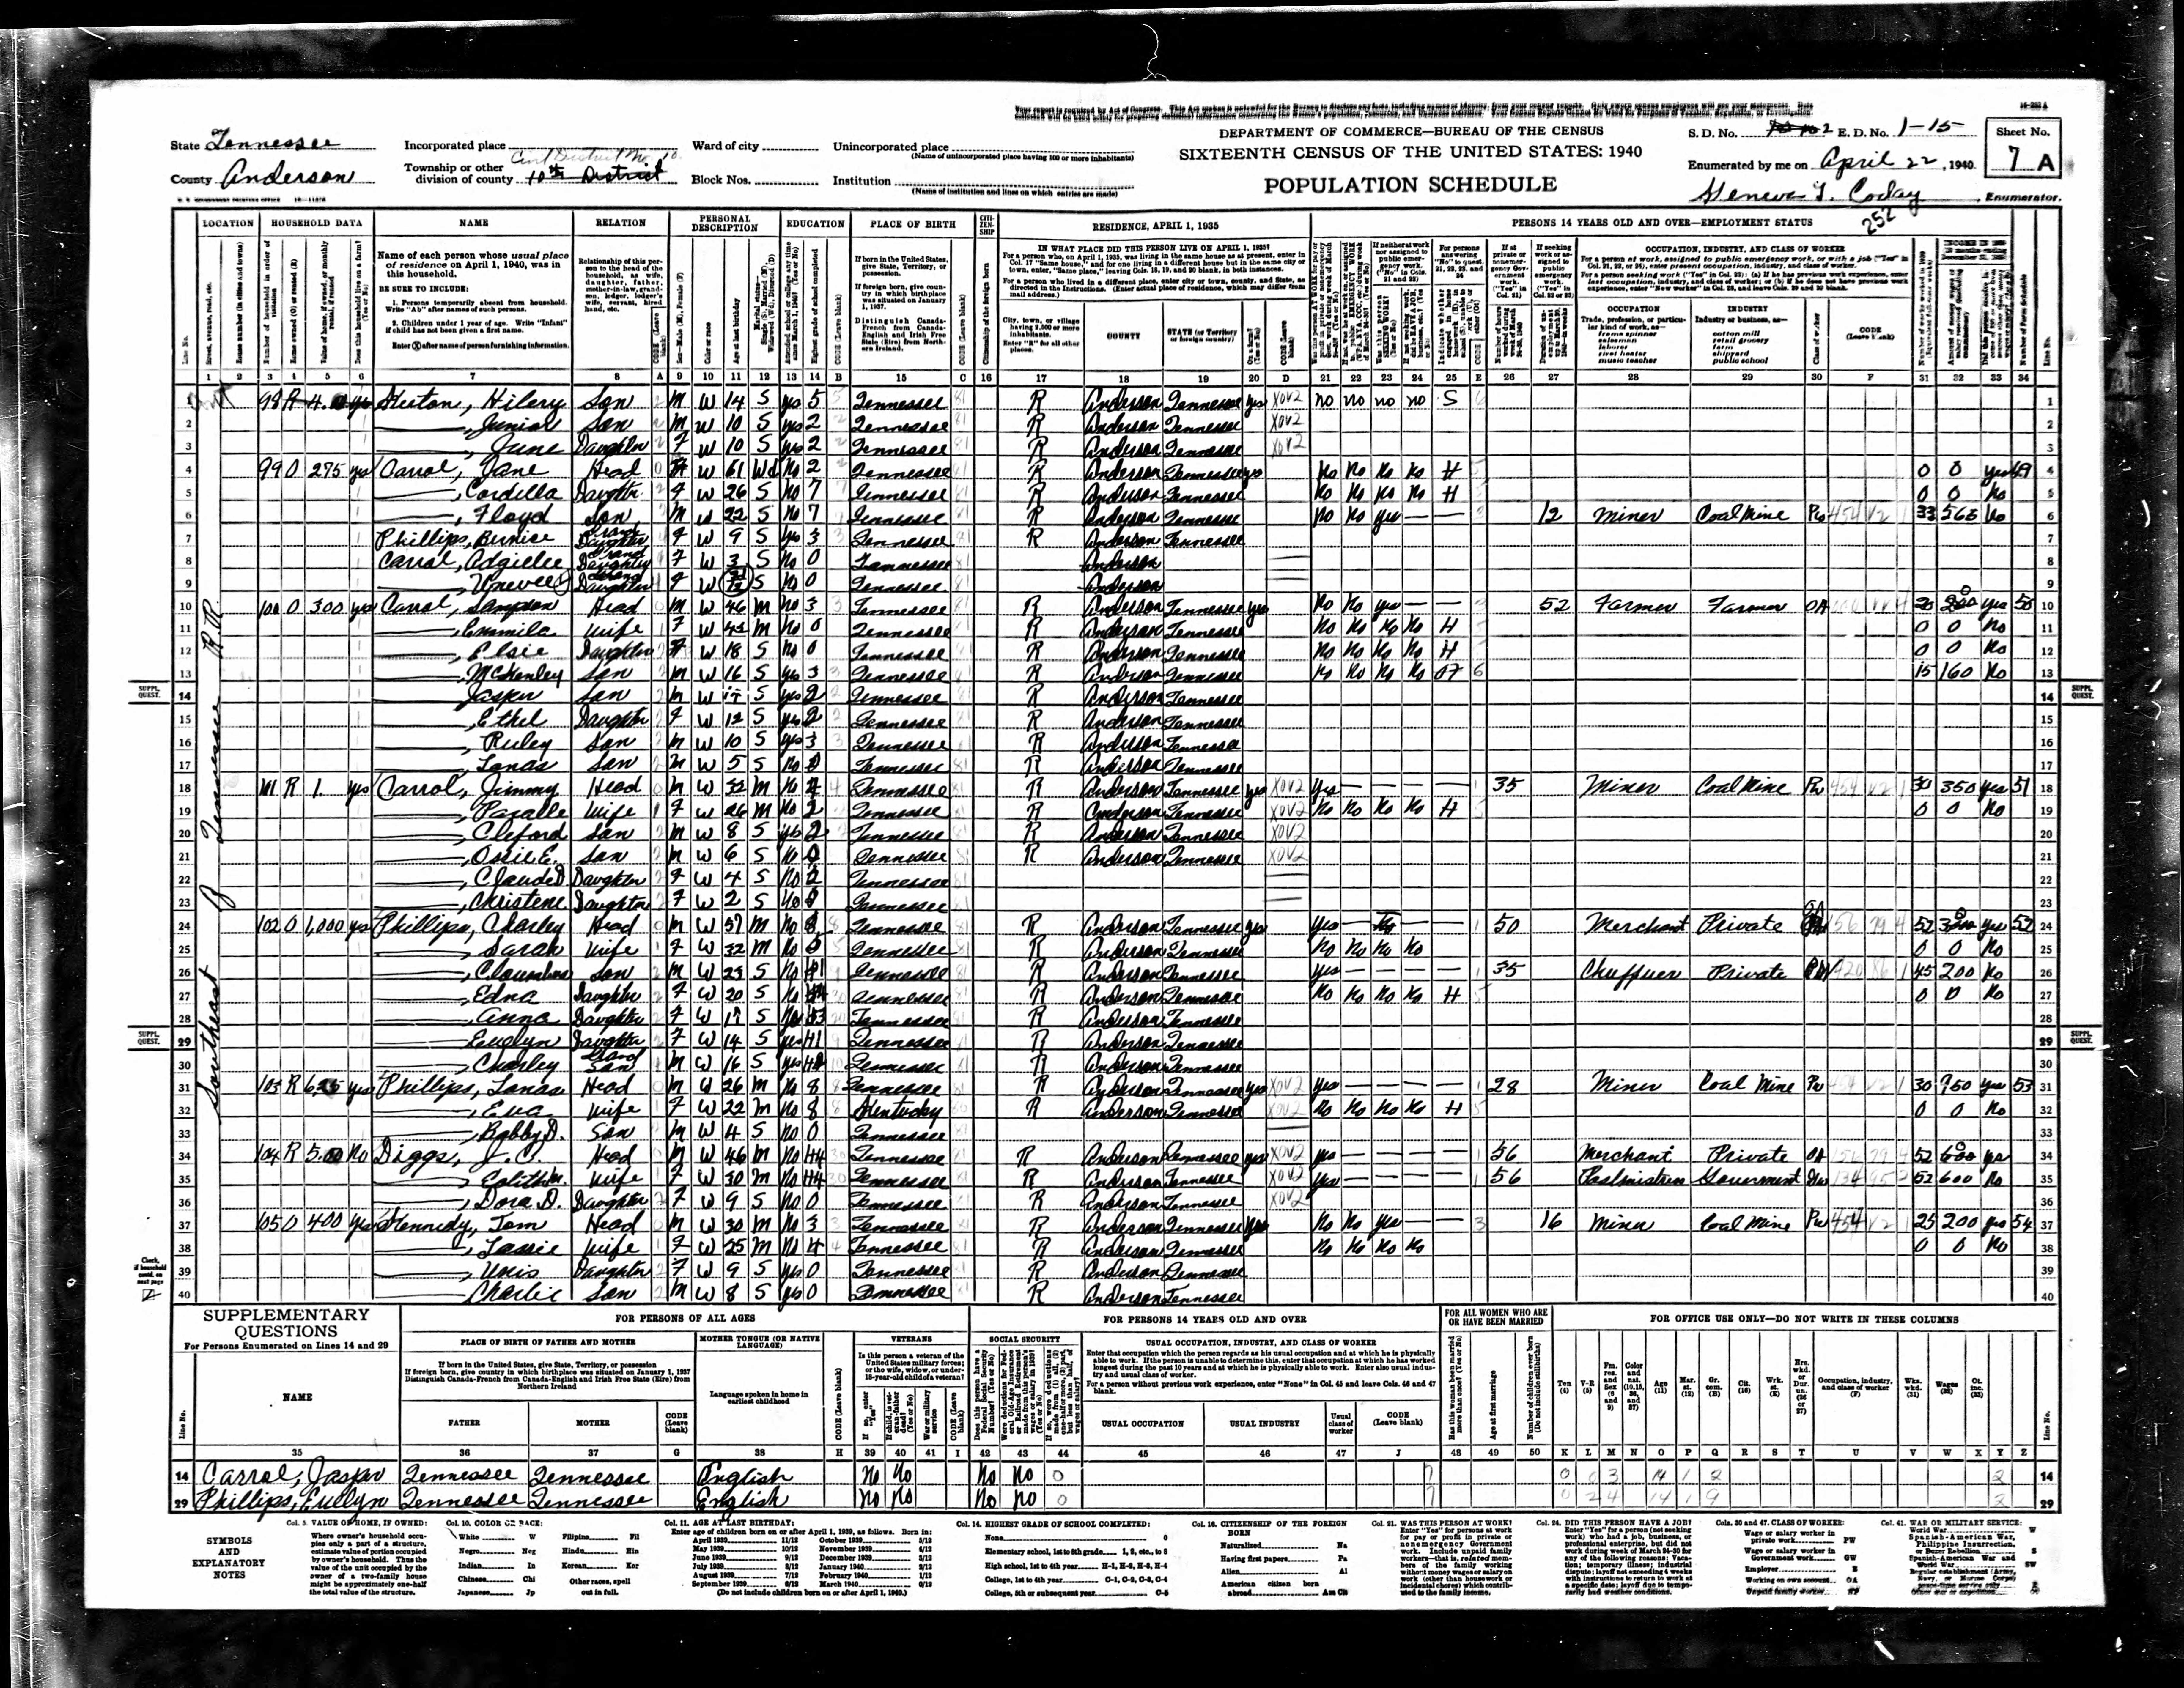 1940 U.S. Census, Anderson County, Tennessee, Dist. 10, page 252a